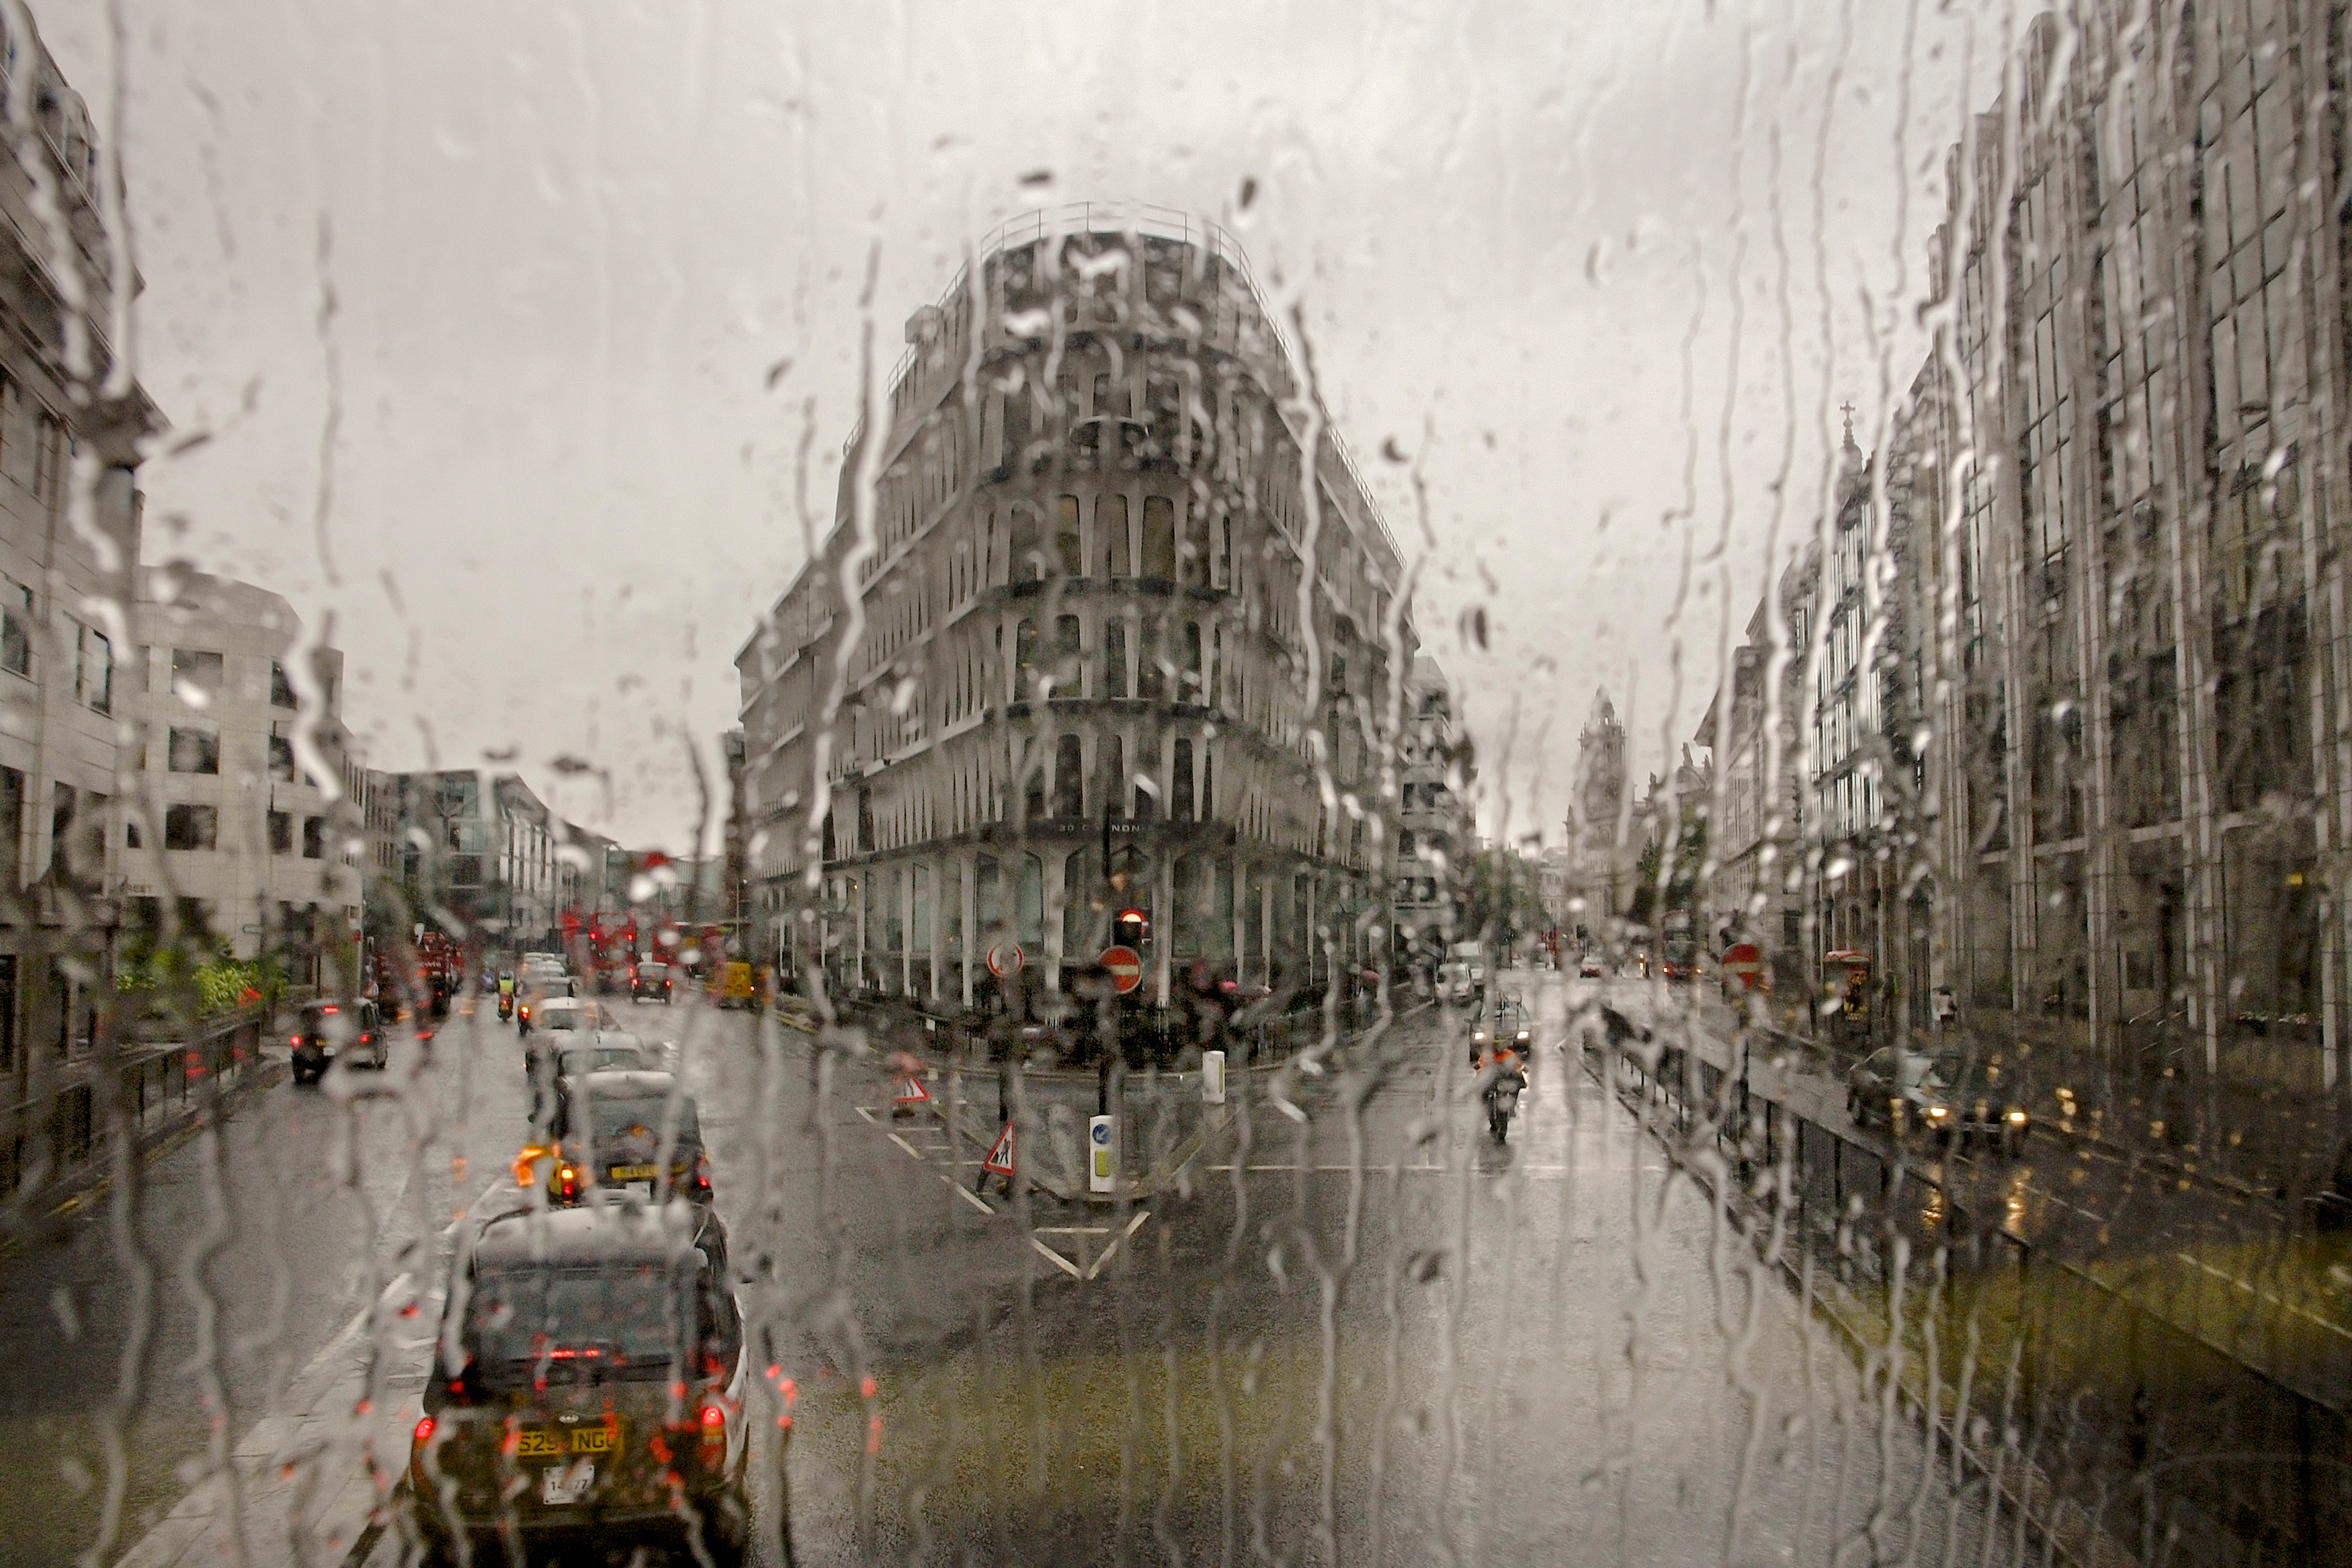 A view of a street junction in the City of London with a row of taxis is visible through a window of a bus covered in rain along the route of Bus 11 which runs from Liverpool street to Fulham Town Hall.[This image was photographed through the window of one of London's double decker busses and is part of 'Last Stop', a photo project now published as a book, which aims to document the city, its movements and migrations, its landscape and architecture, its diversity and energy.]